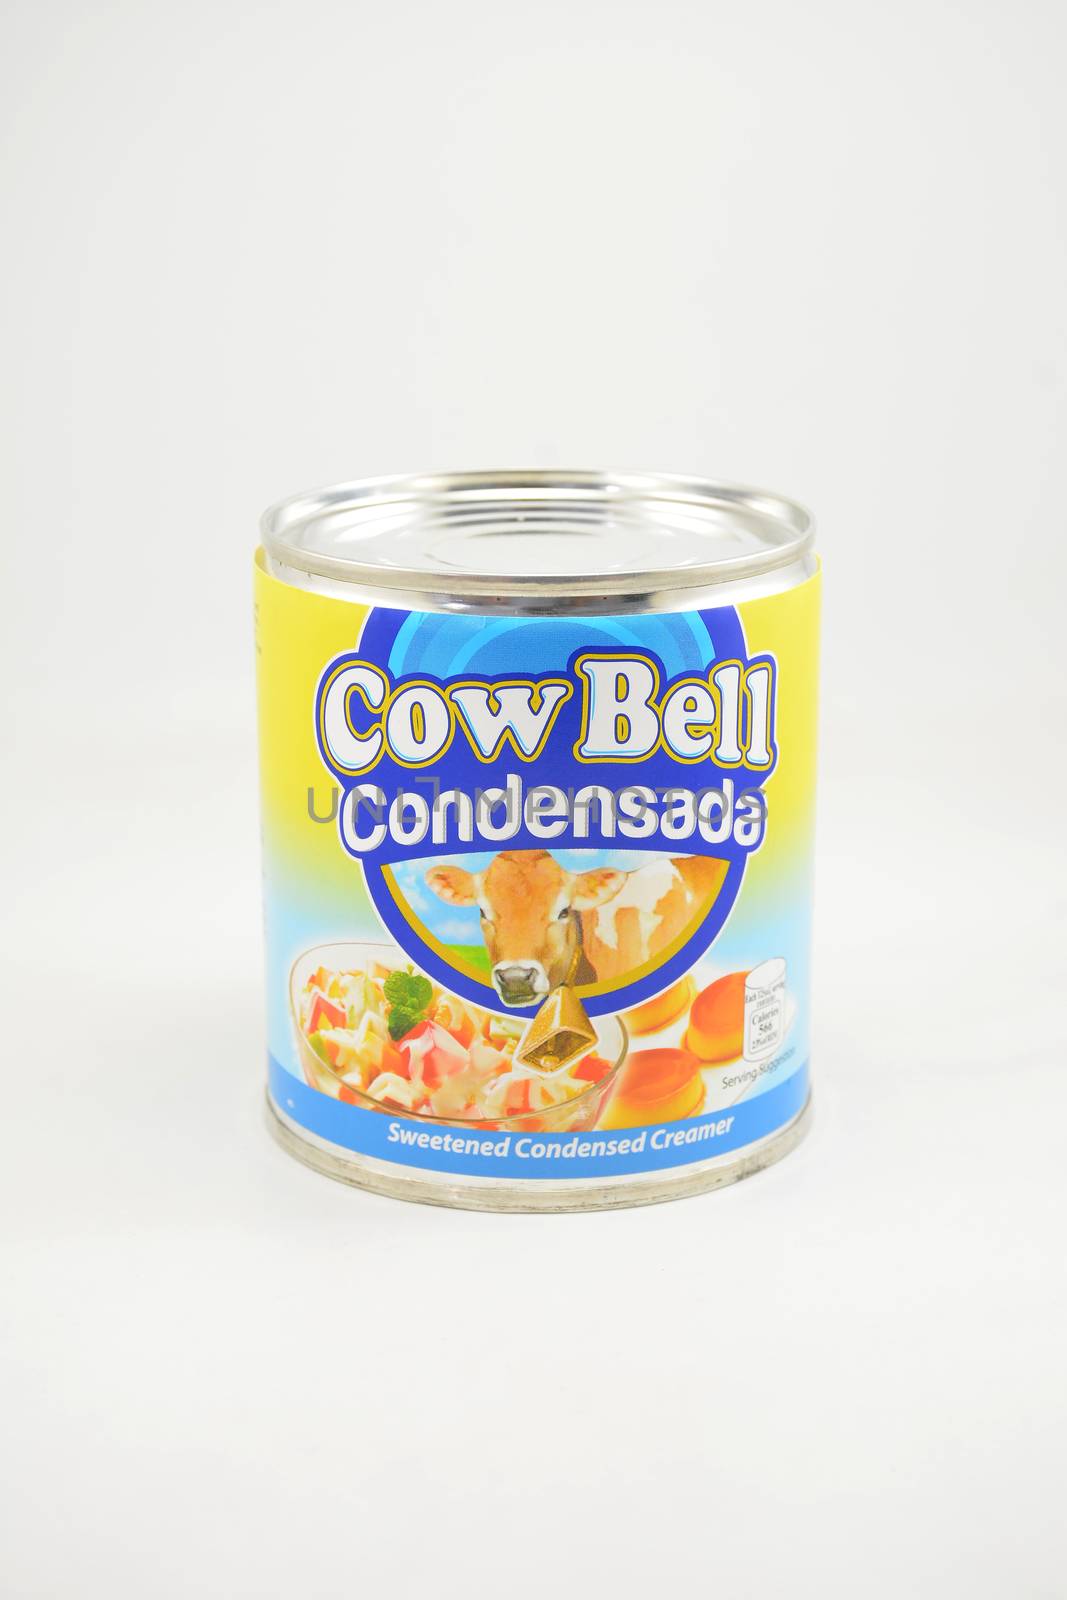 Cow bell condensed milk can in Manila, Philippines by imwaltersy